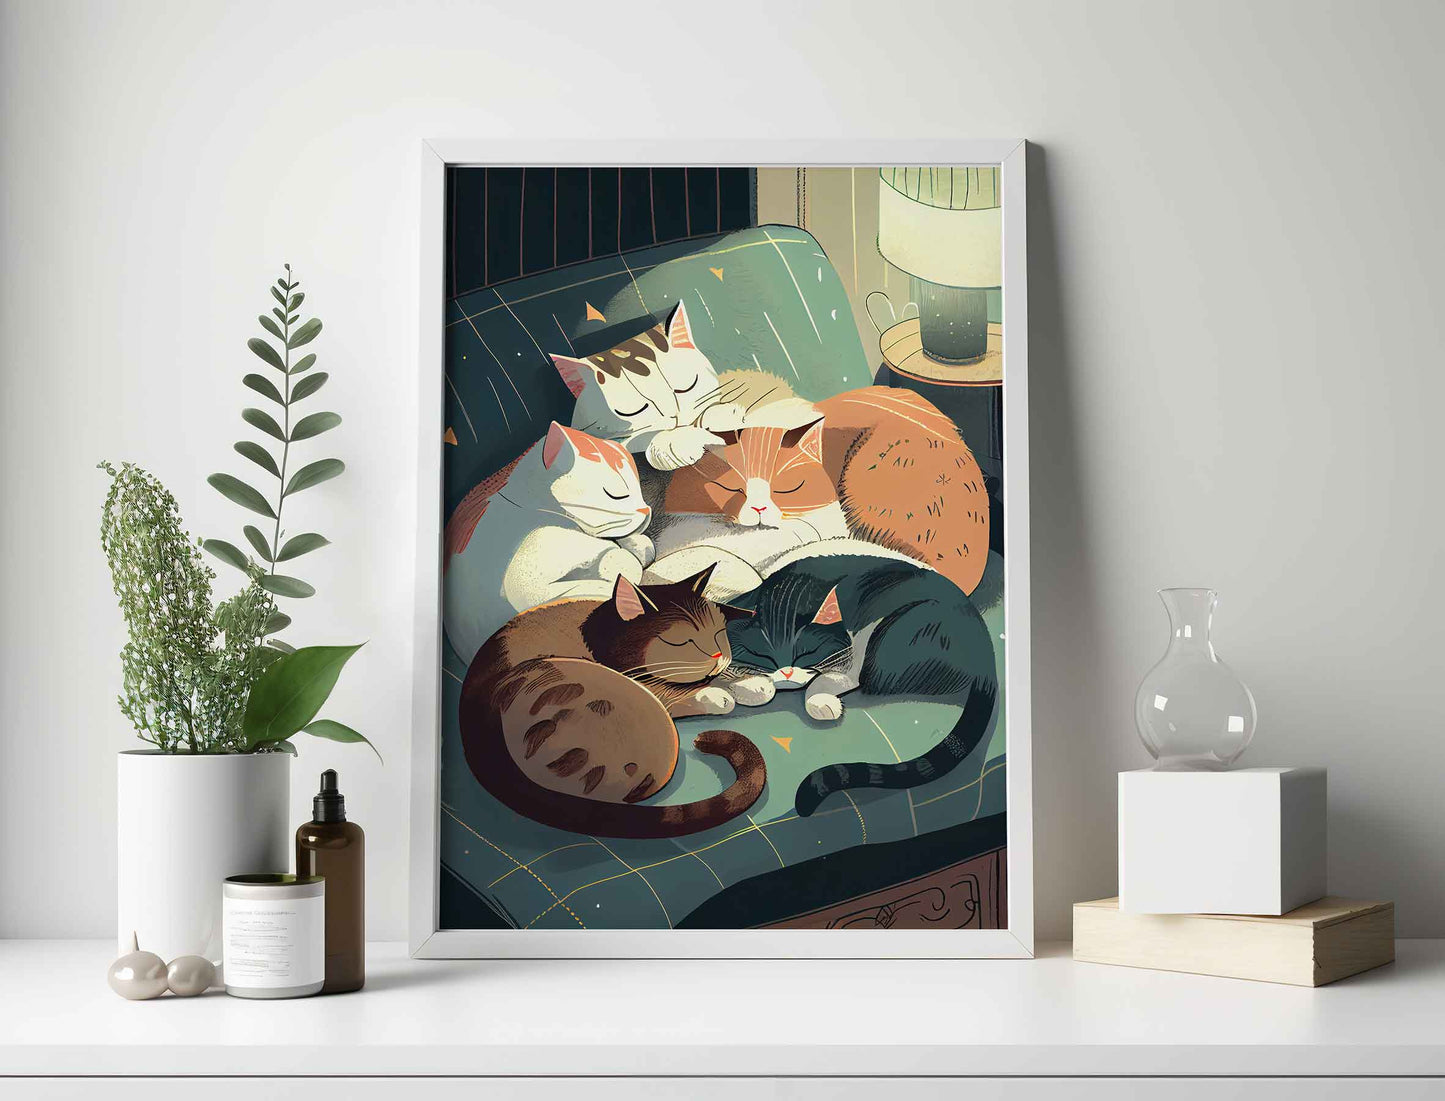 Framed Image of Cute Cats Sleeping at Home Illustration Wall Art Poster Print